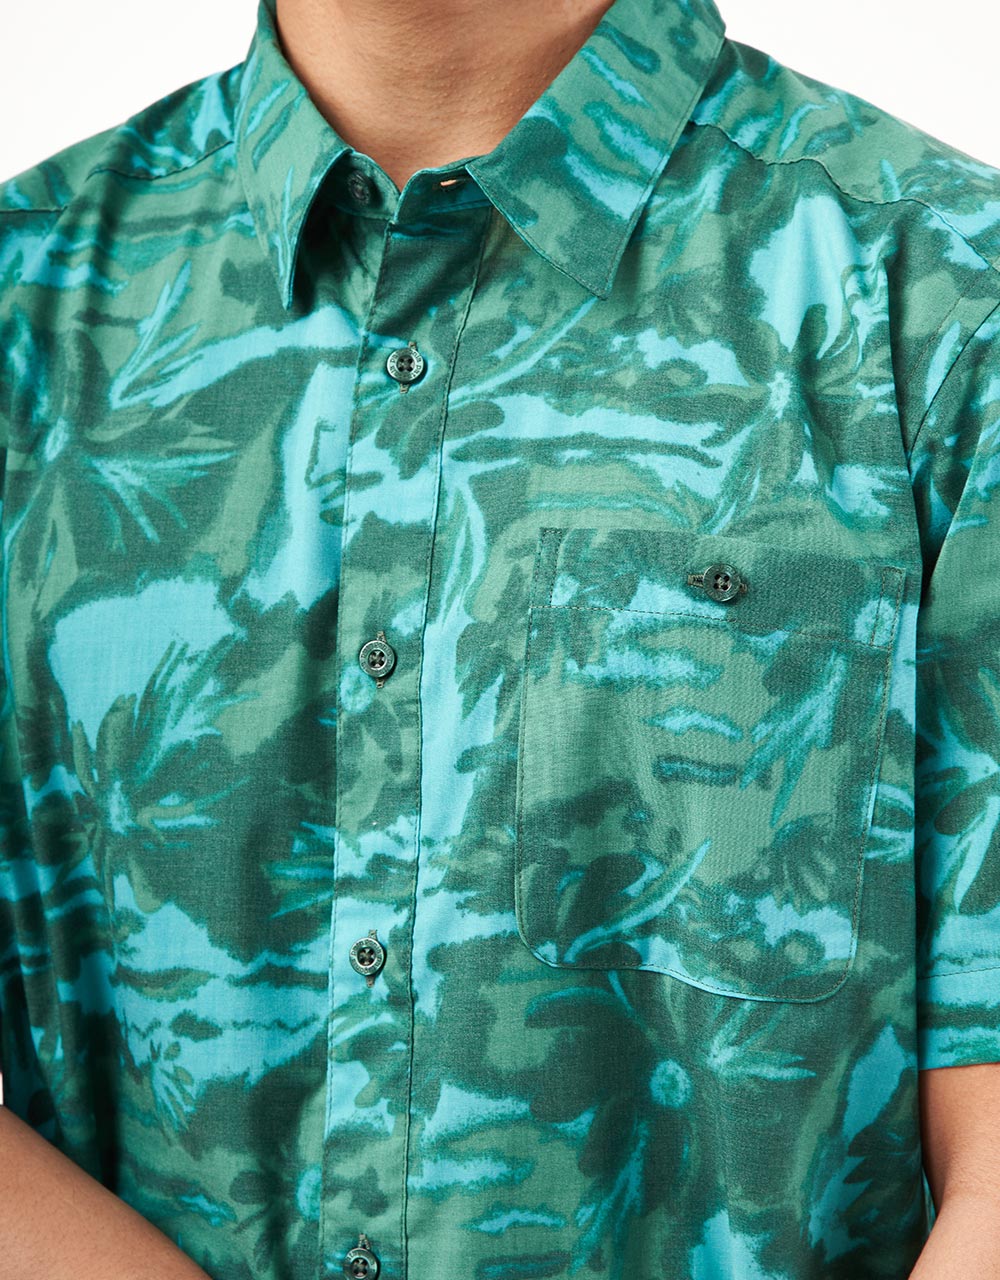 Patagonia Go To Shirt - Cliffs and Waves: Conifer Green